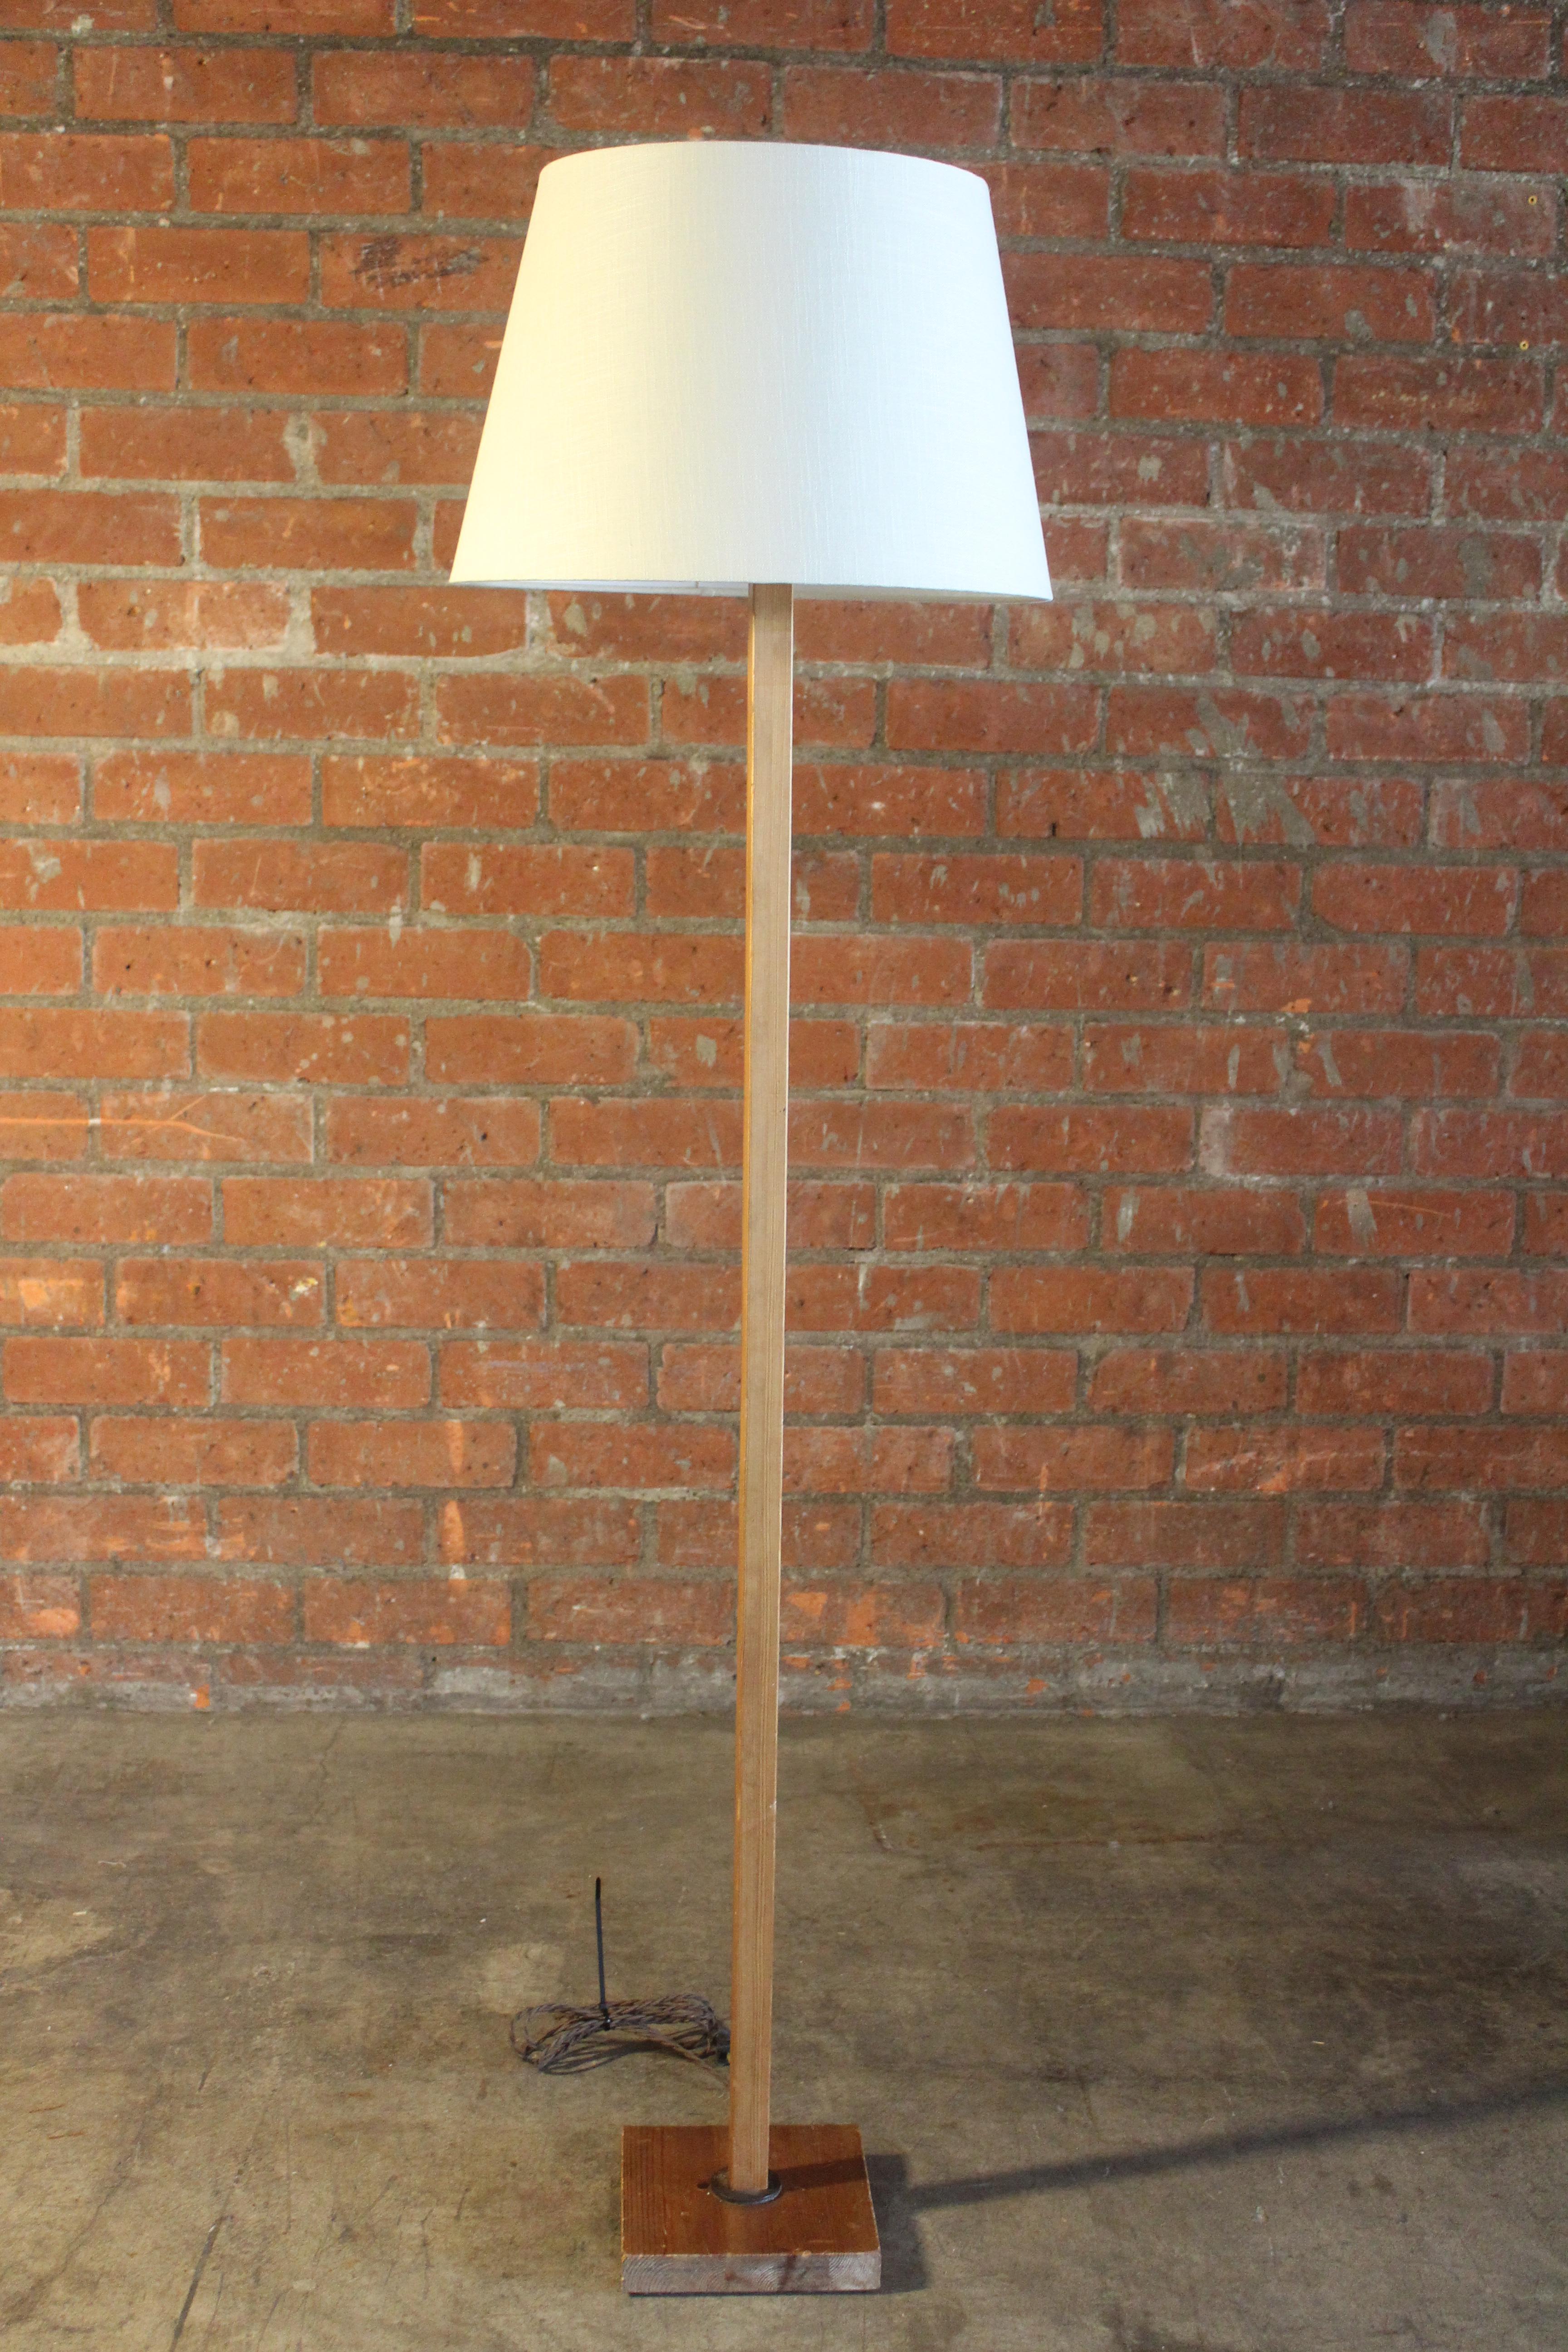 A vintage 1970s Swedish pine floor lamp. Newly rewired with a custom made shade in linen. The wood finish shows minor signs of wear.
Measures: Base is 8.25 x 8.25 and overall height of 66